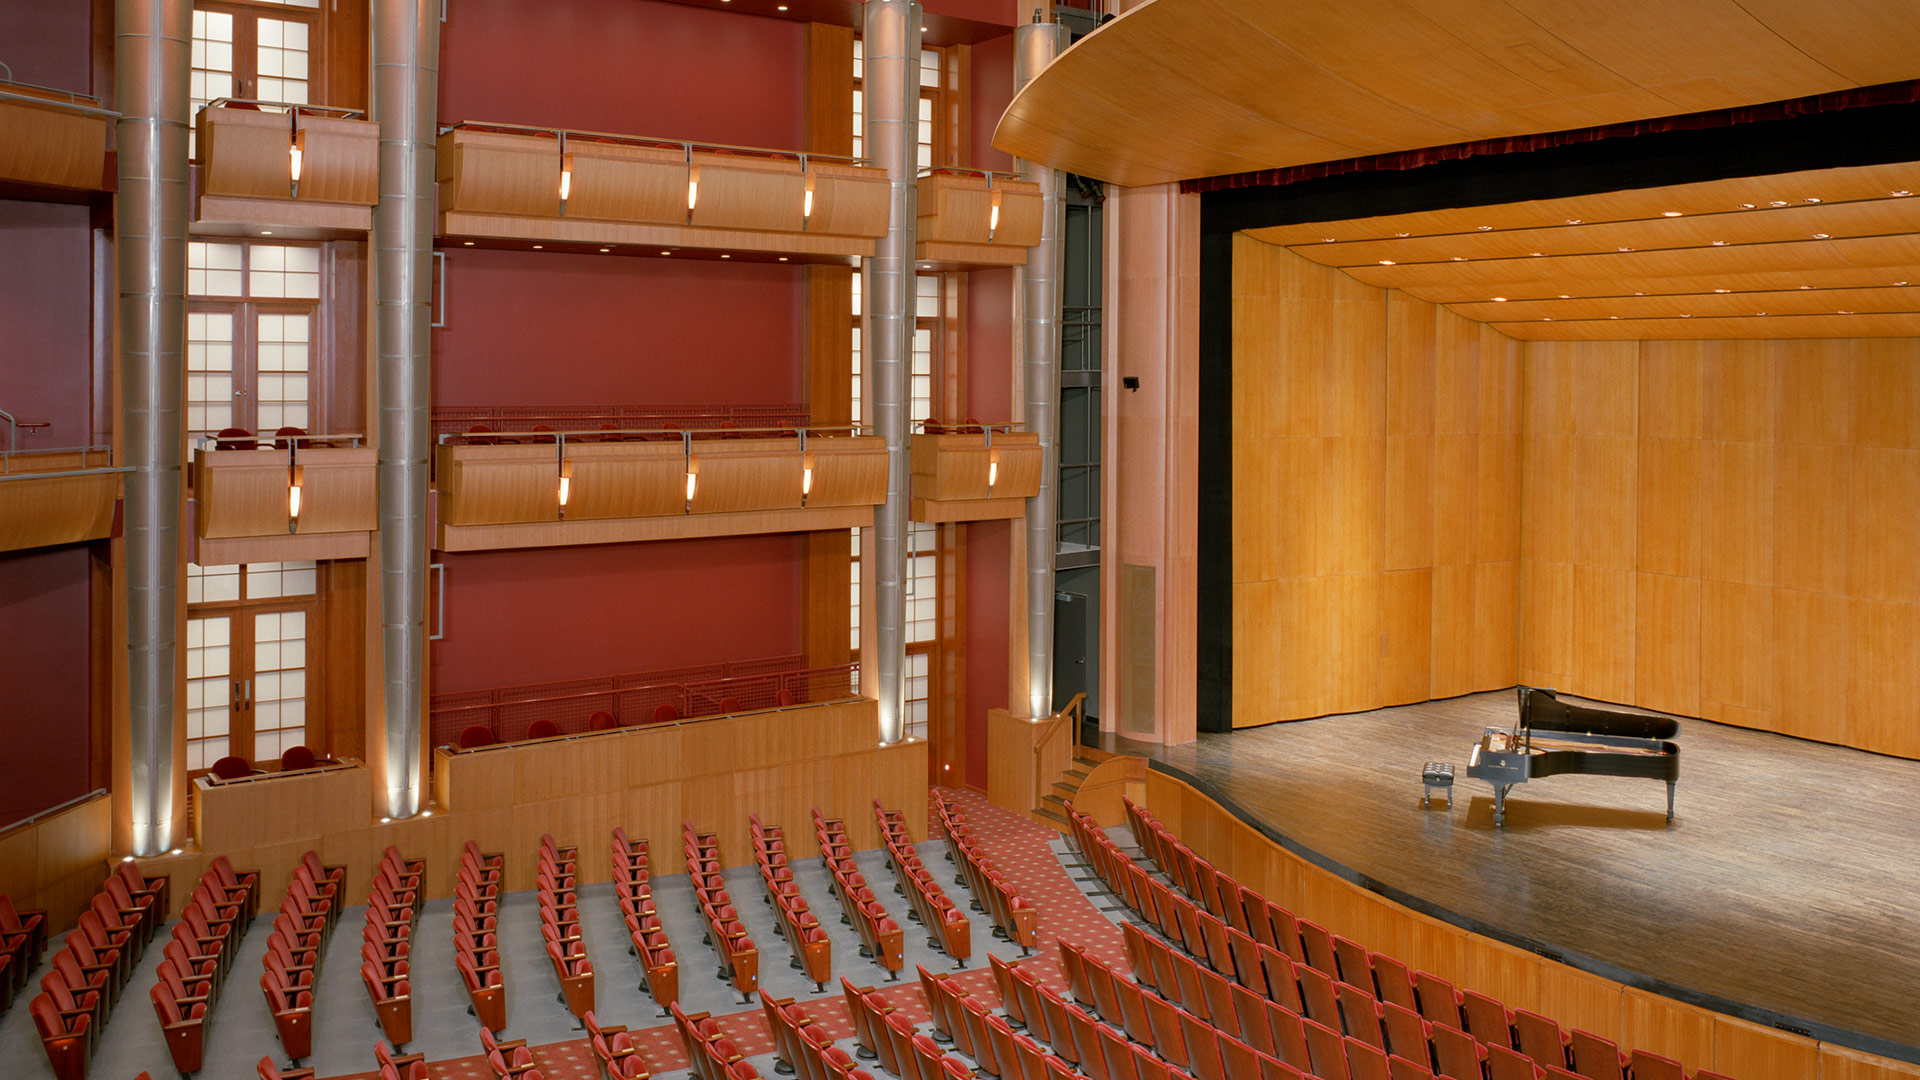 University of Missouri-St. Louis, Blanche M. Touhill Performing Arts Center